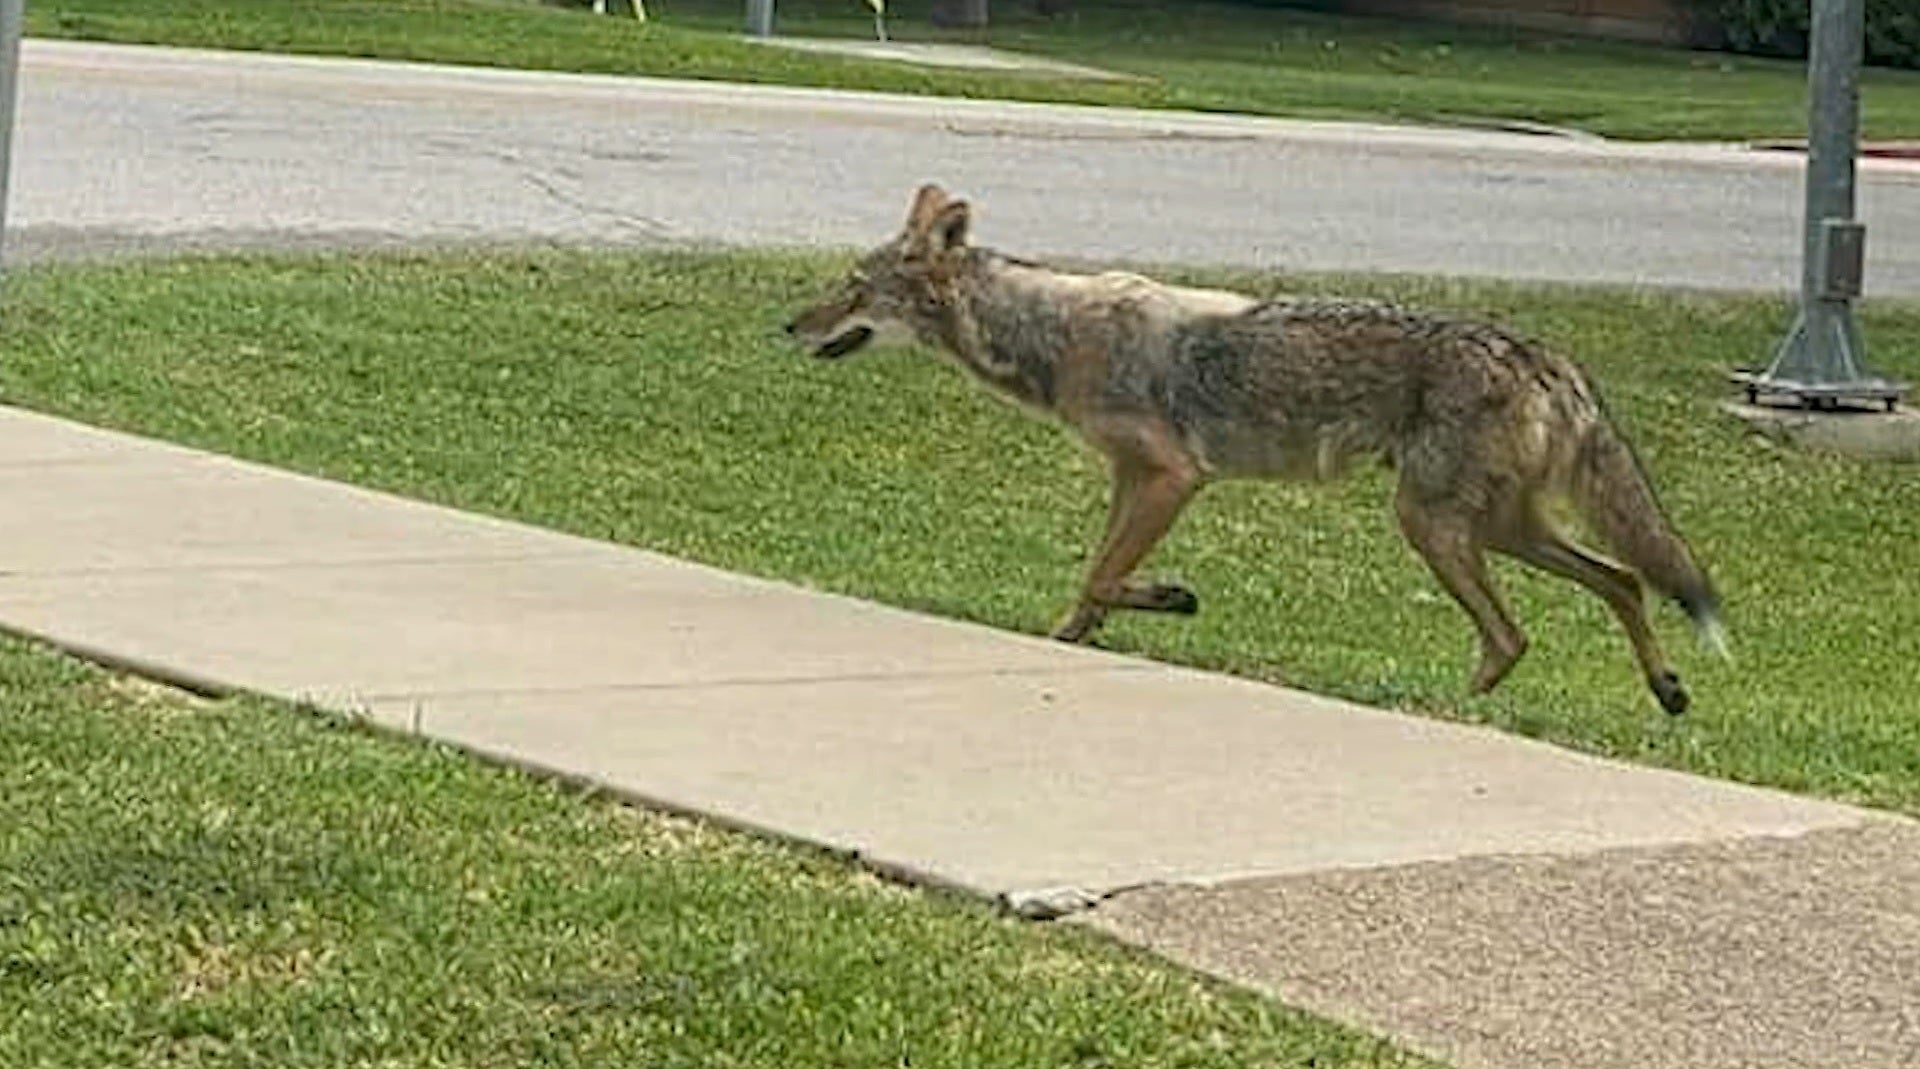 A coyote attacked a 2-year-old child in the 9200 block of Royalpine Drive, near White Rock Trail in Dallas, Texas